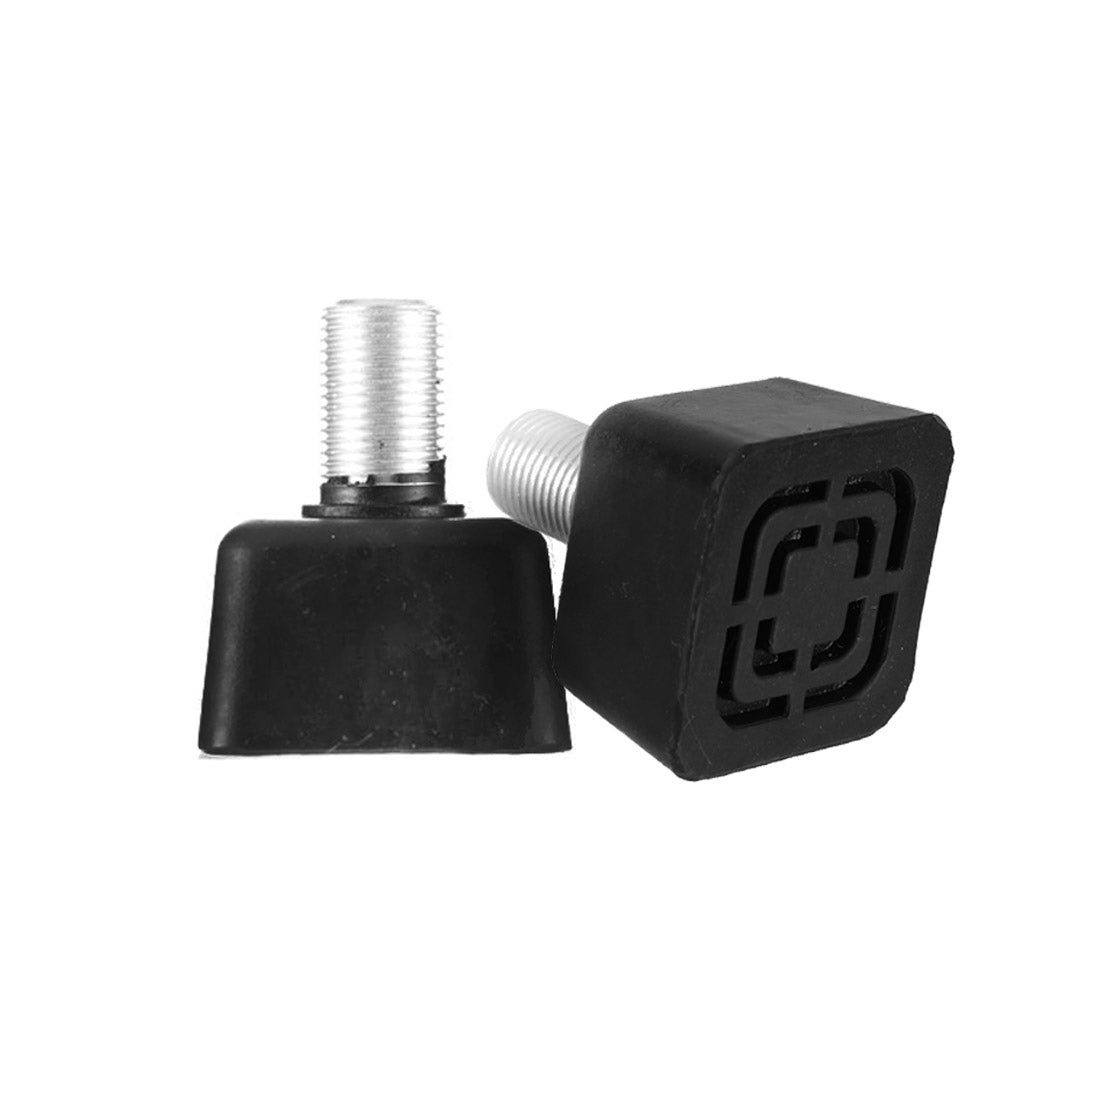 Sure-Grip Square Jump Toe Stops Roller Skate Hardware and Parts